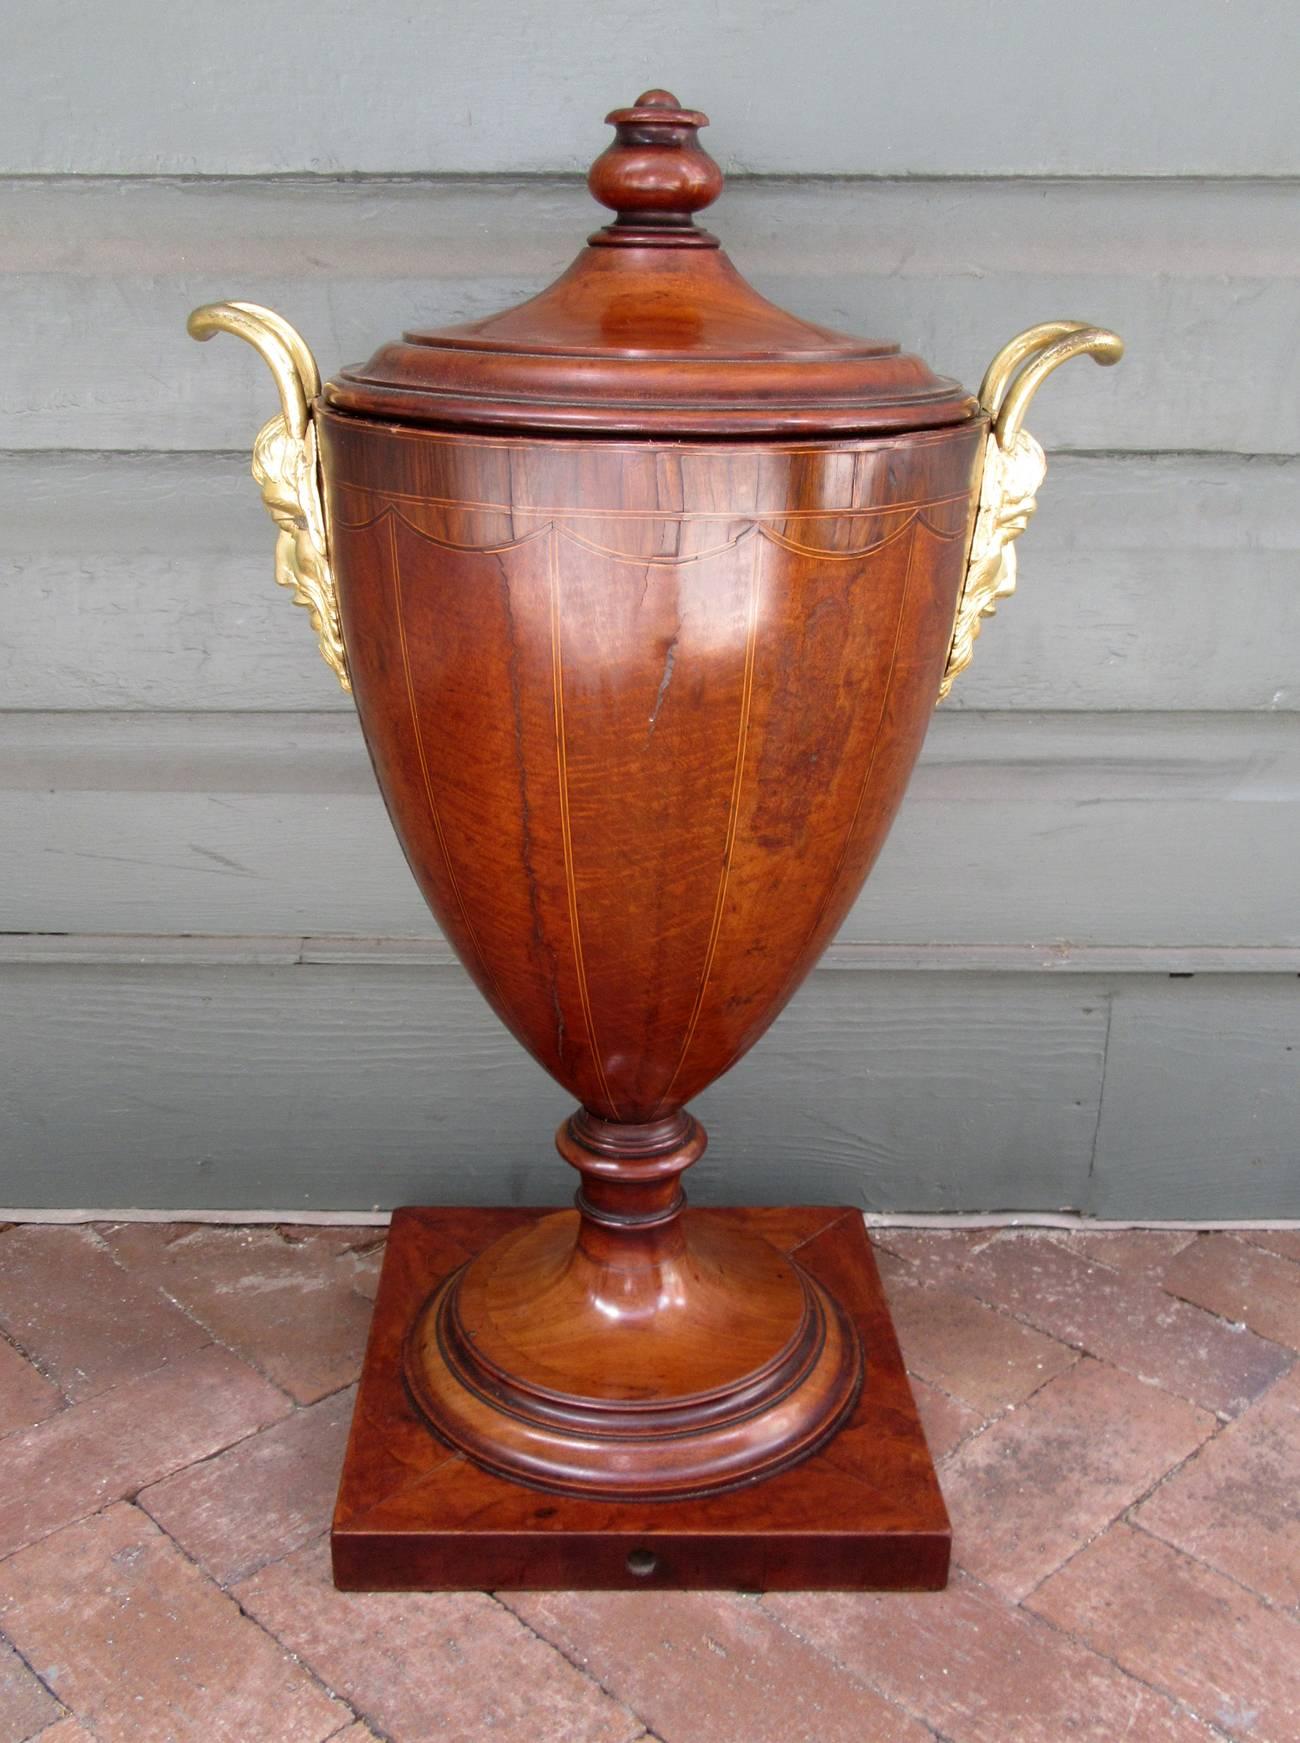 A late 18th century English George III mahogany urn or wine cooler on square base, circa 1780, featuring bronze doré mounted handles with Bacchus, double lids and original liner that has been coated with sealant. The base is 12